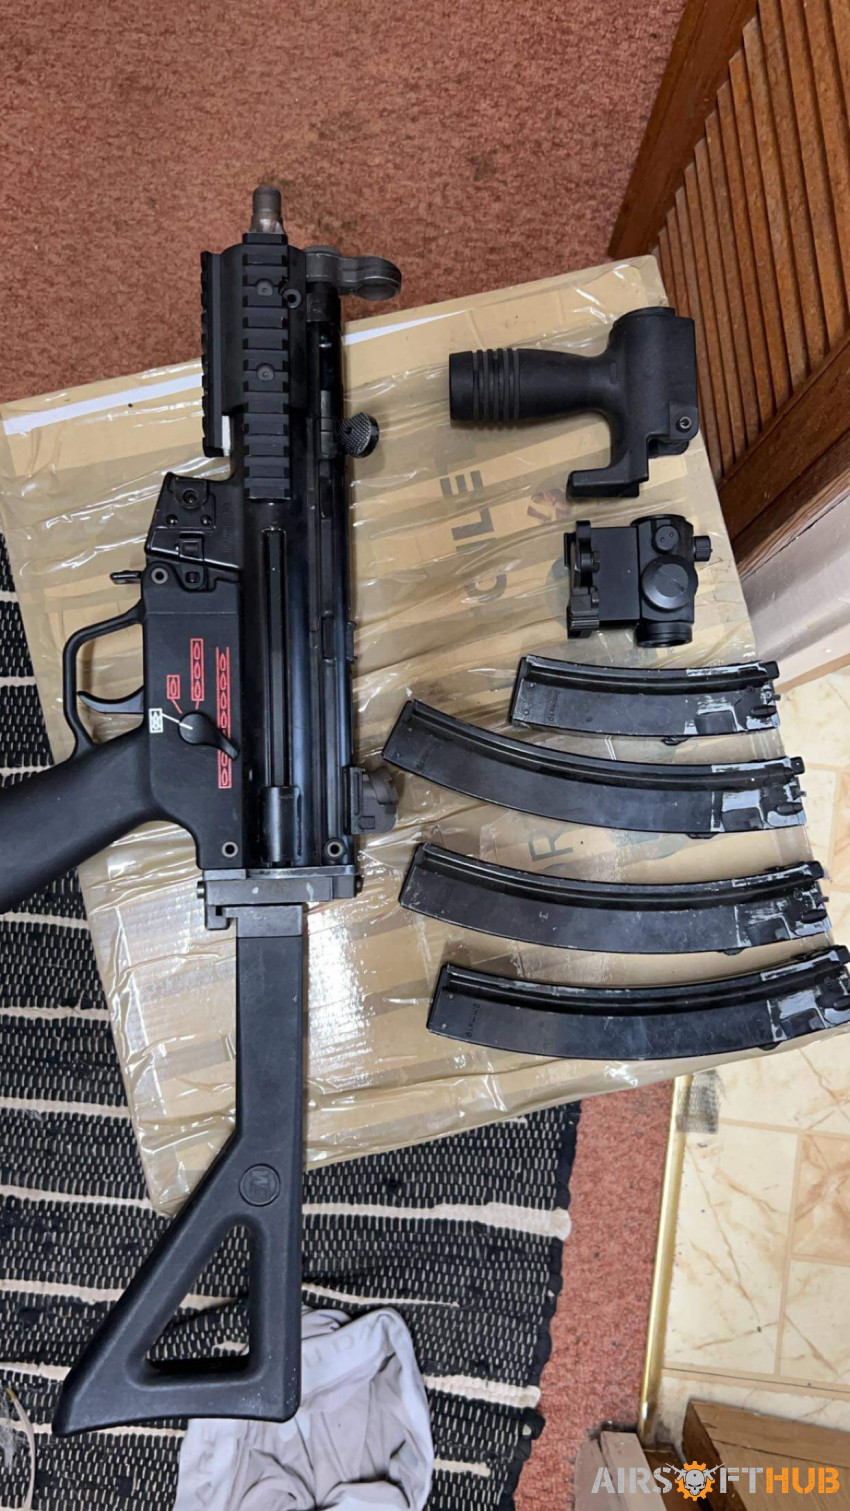 WE Gbbr mp5 trade - Used airsoft equipment